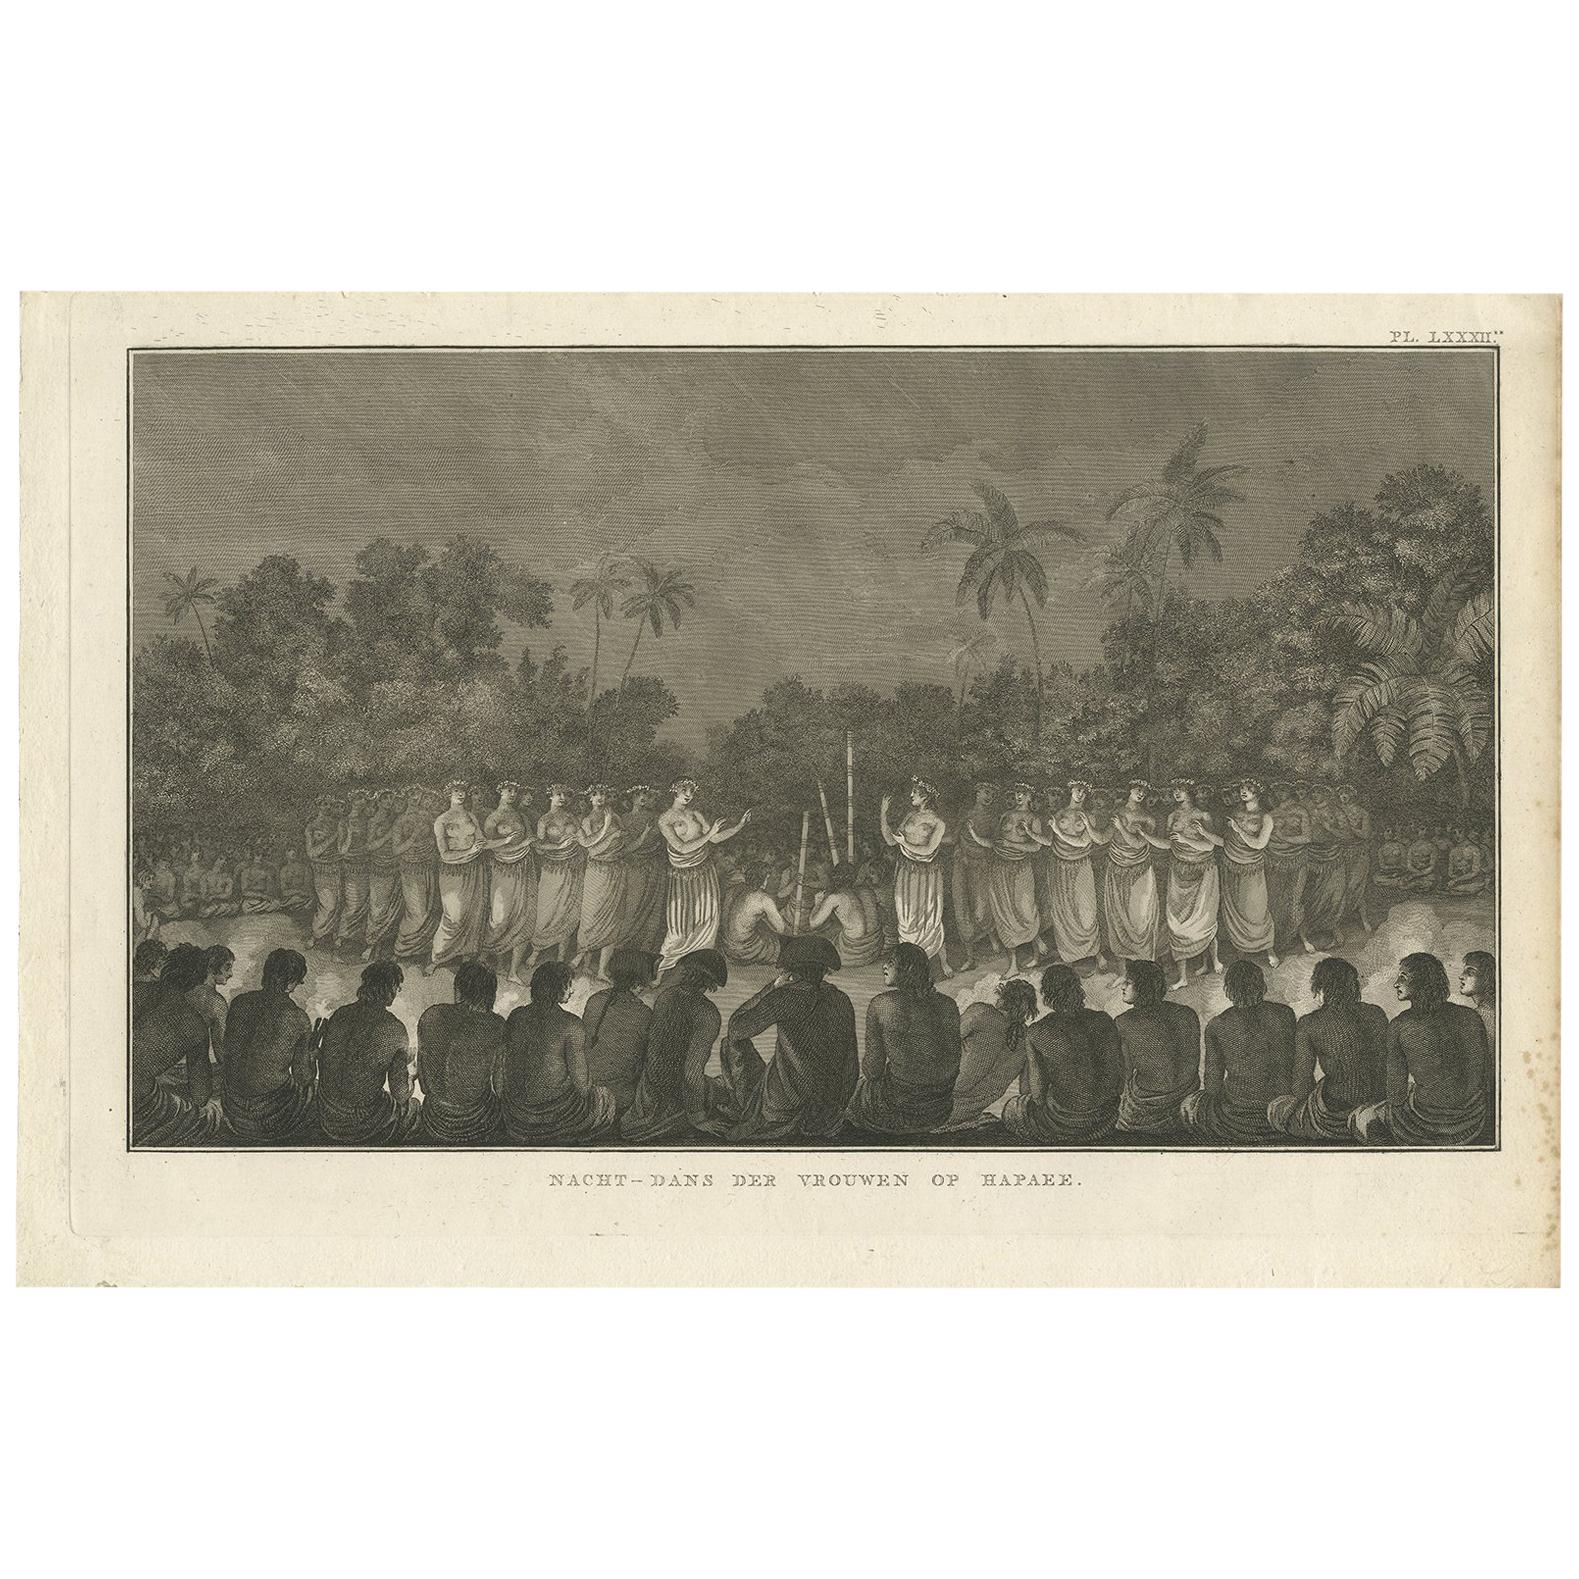 Antique Print of a Night Dance by Women from Hapaee by Cook, 1803